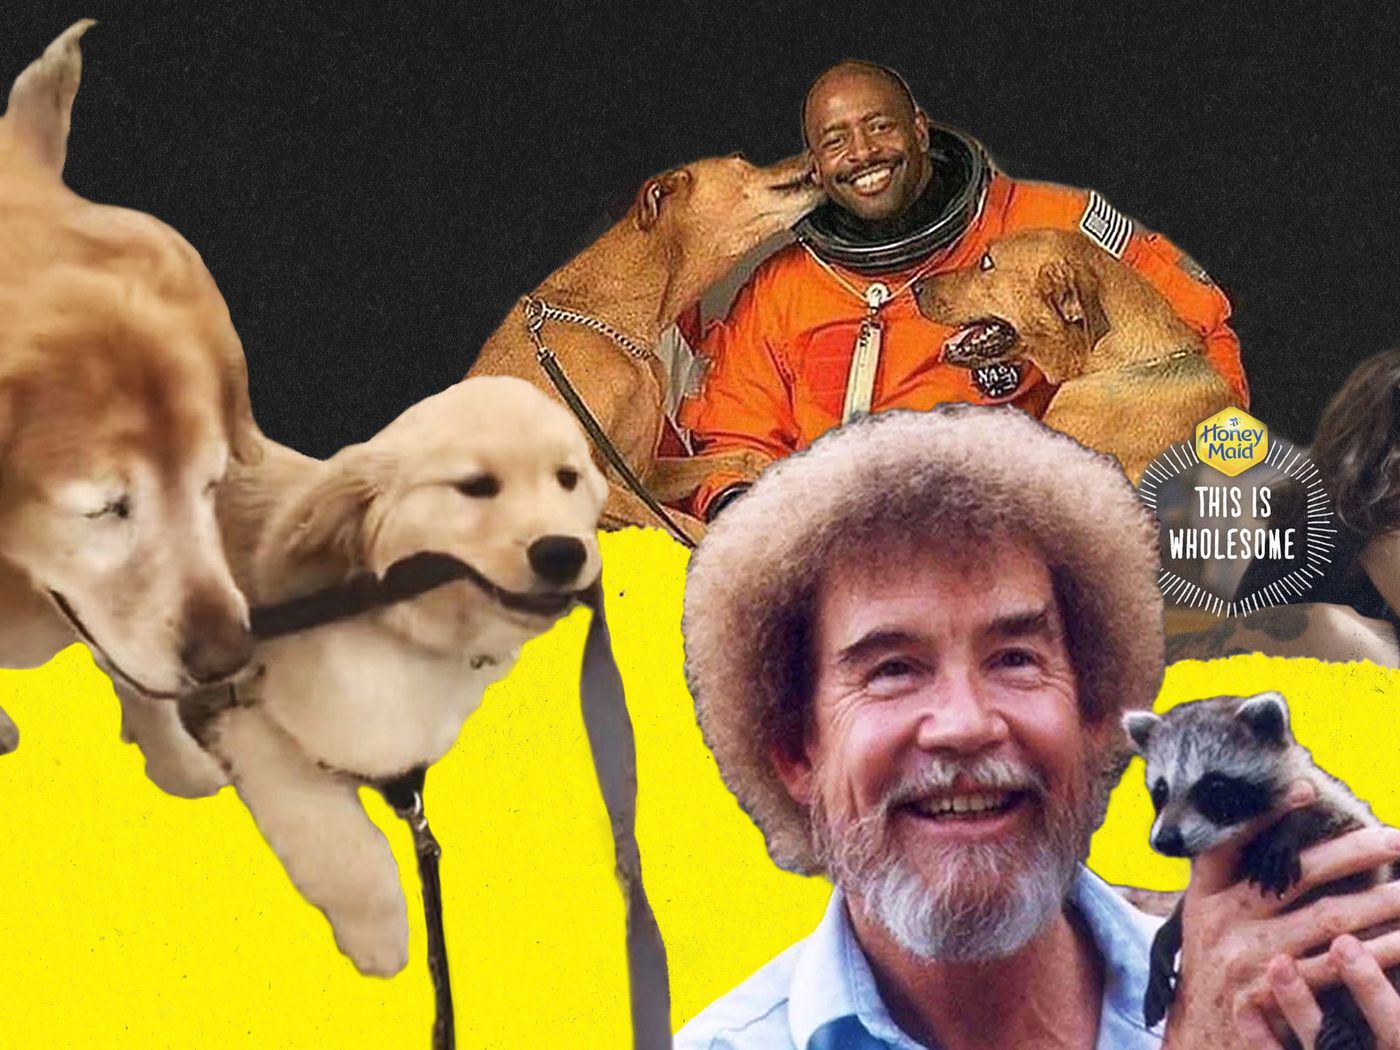 Wholesome culture, from memes to puppies, explained